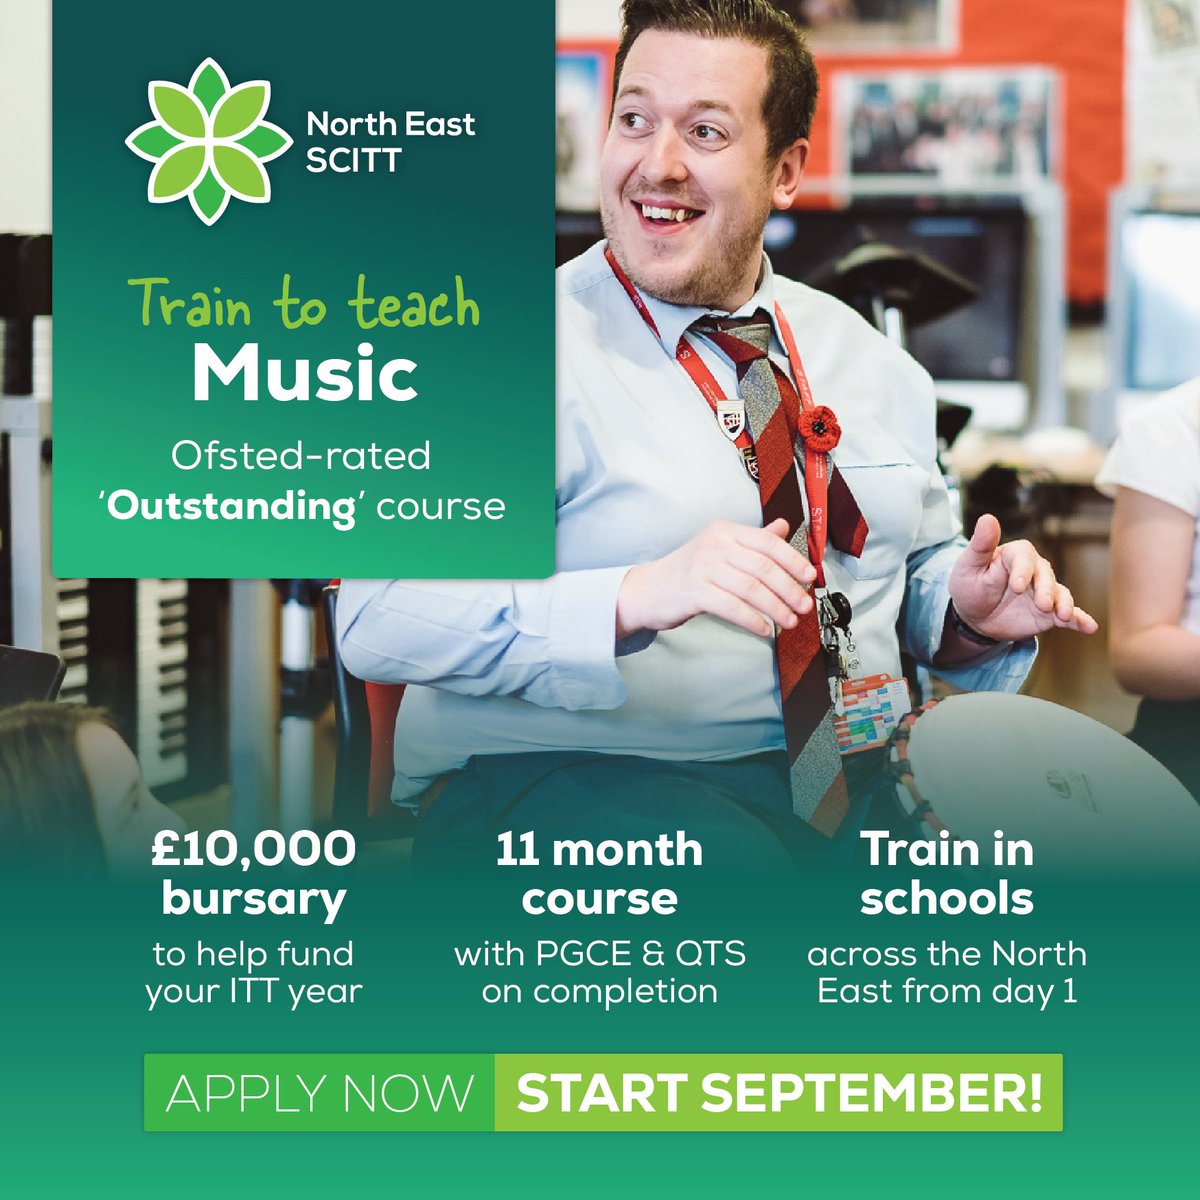 ⭐ We're recruiting ⭐ Music teacher training places! 🎶🎺 Interested? ✨ Spend a morning in school to see if teaching is for you! 🙌 Book your place: loom.ly/3KRIjGk #nejobs #northeastjobs #recruiting